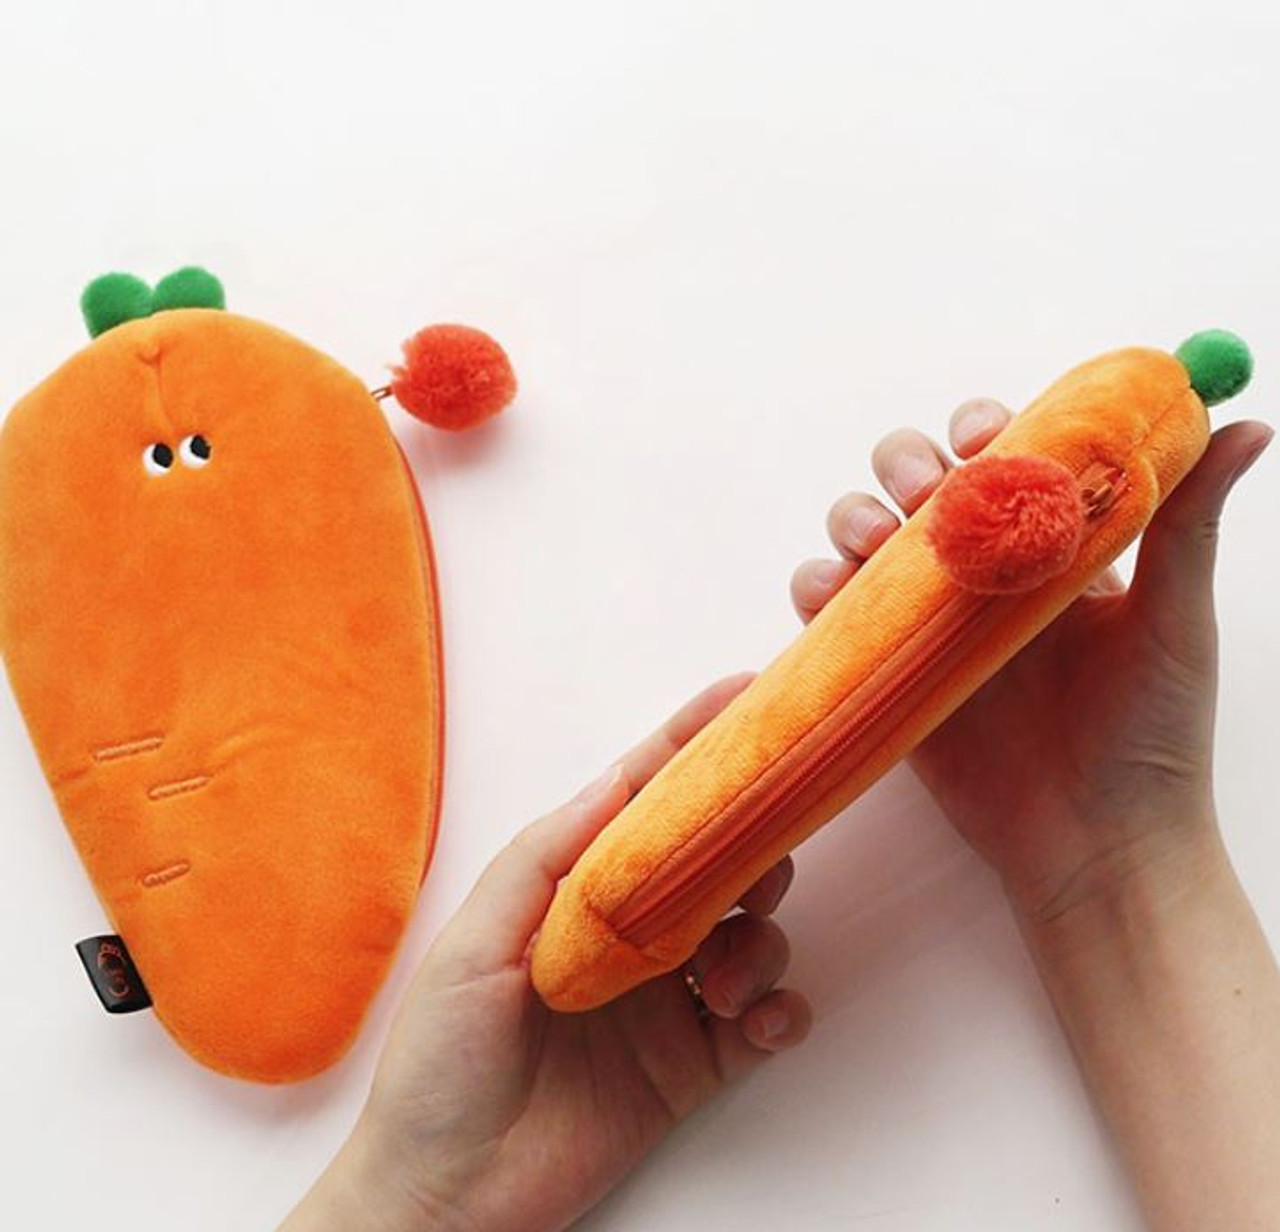 Dropship [Catch My Carrot] Embroidered Applique Pencil Pouch Bag / Cosmetic  Bag / Carrying Case (7.5*2.2*1.6) to Sell Online at a Lower Price